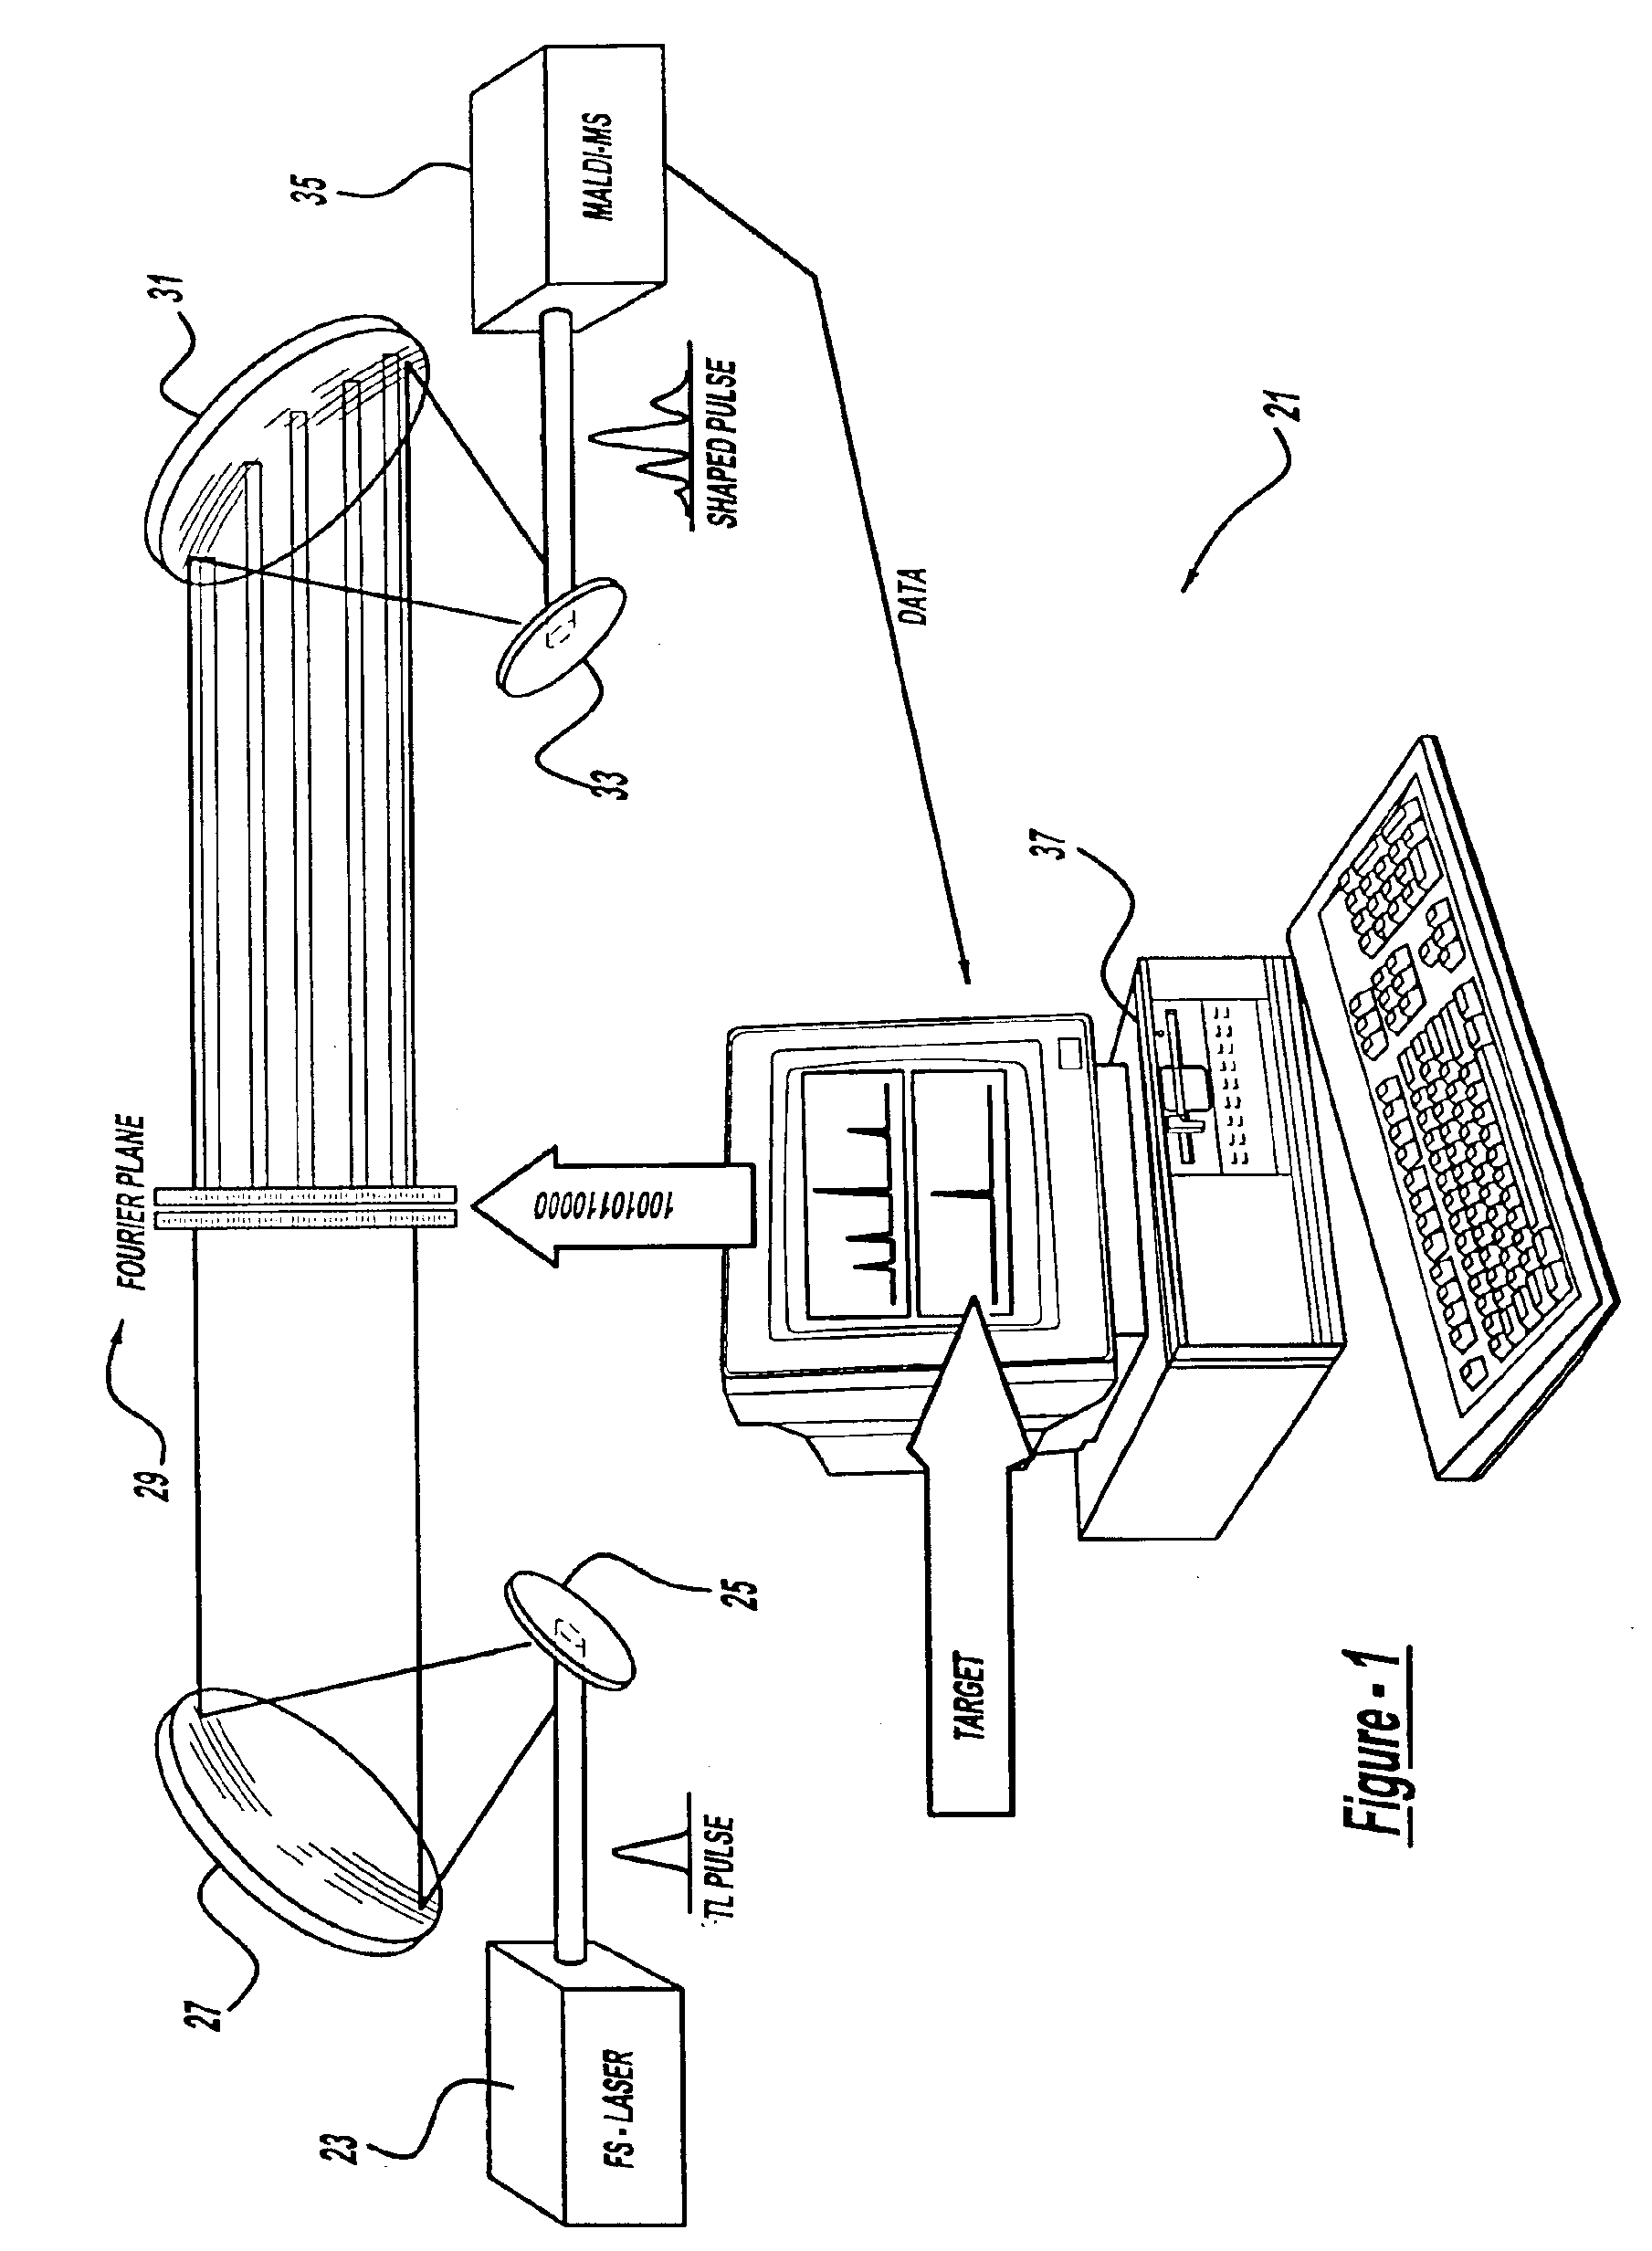 Control system and apparatus for use with laser excitation or ionization